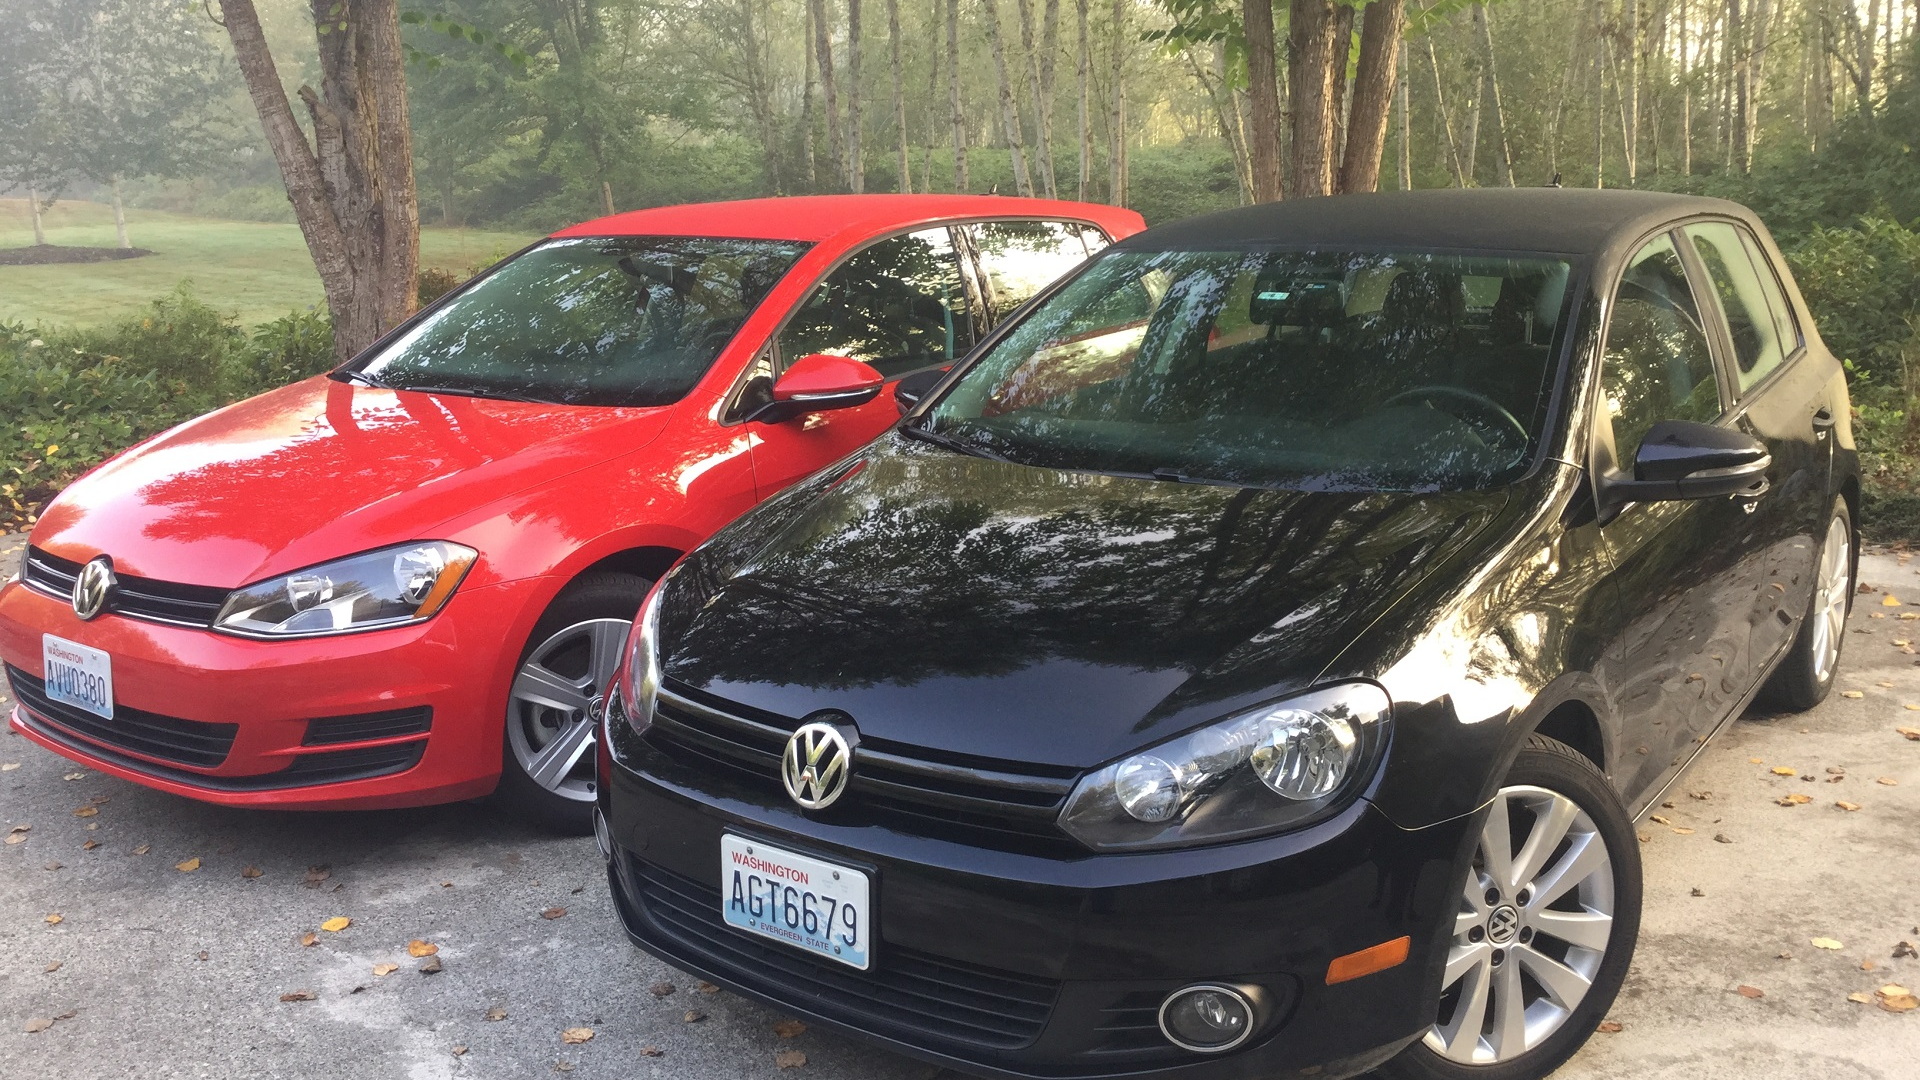 Volkswagen TDI diesel vehicles owned by Phil Grate and family, Seattle, Washington